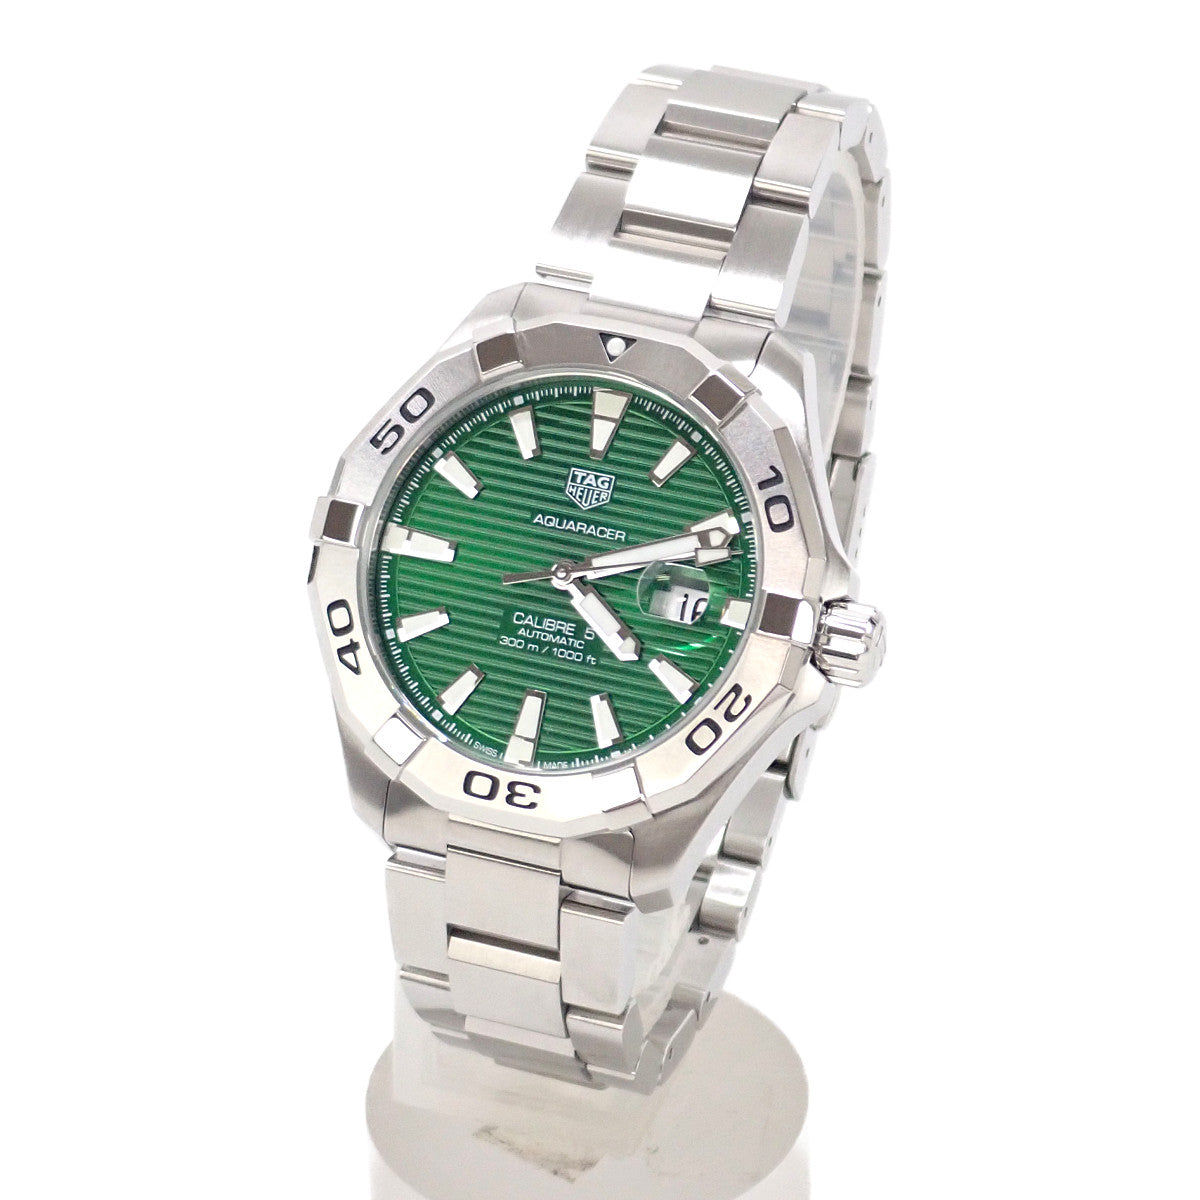 TAG HEUER Aquaracer Caliber 5 Men's Wristwatch WAY2015.BA0927 in Stainless Steel Silver with Green Dial WAY2015.BA0927